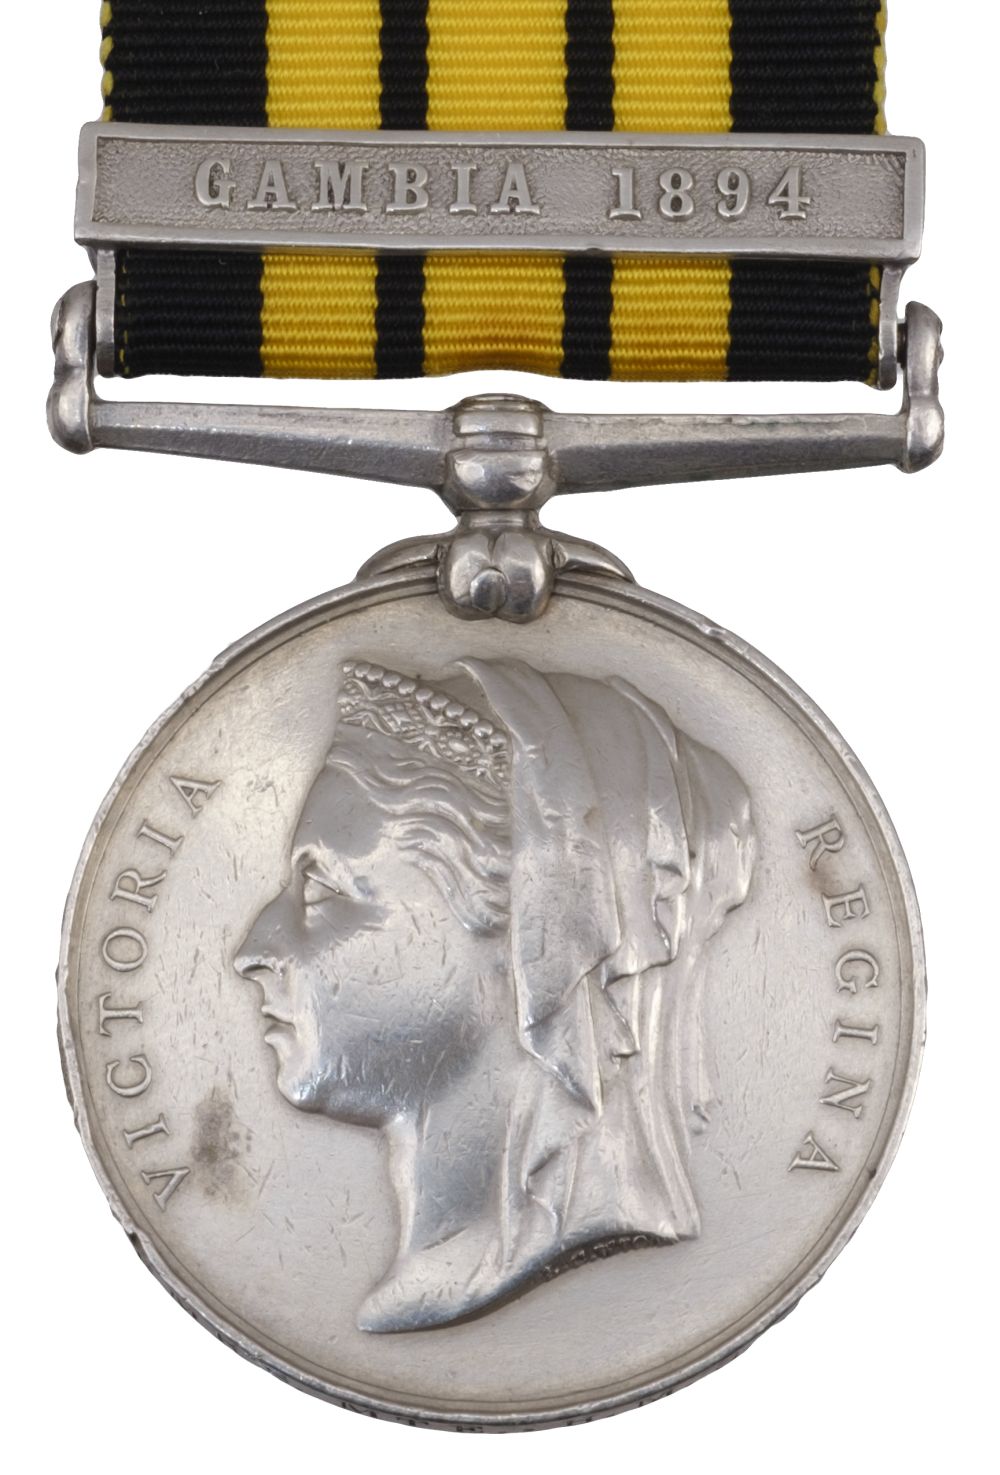 East and West Africa Medal 1887-1900, 1 clasp (E.T. Howe, Armr's Mte., H.M.S. Satellite